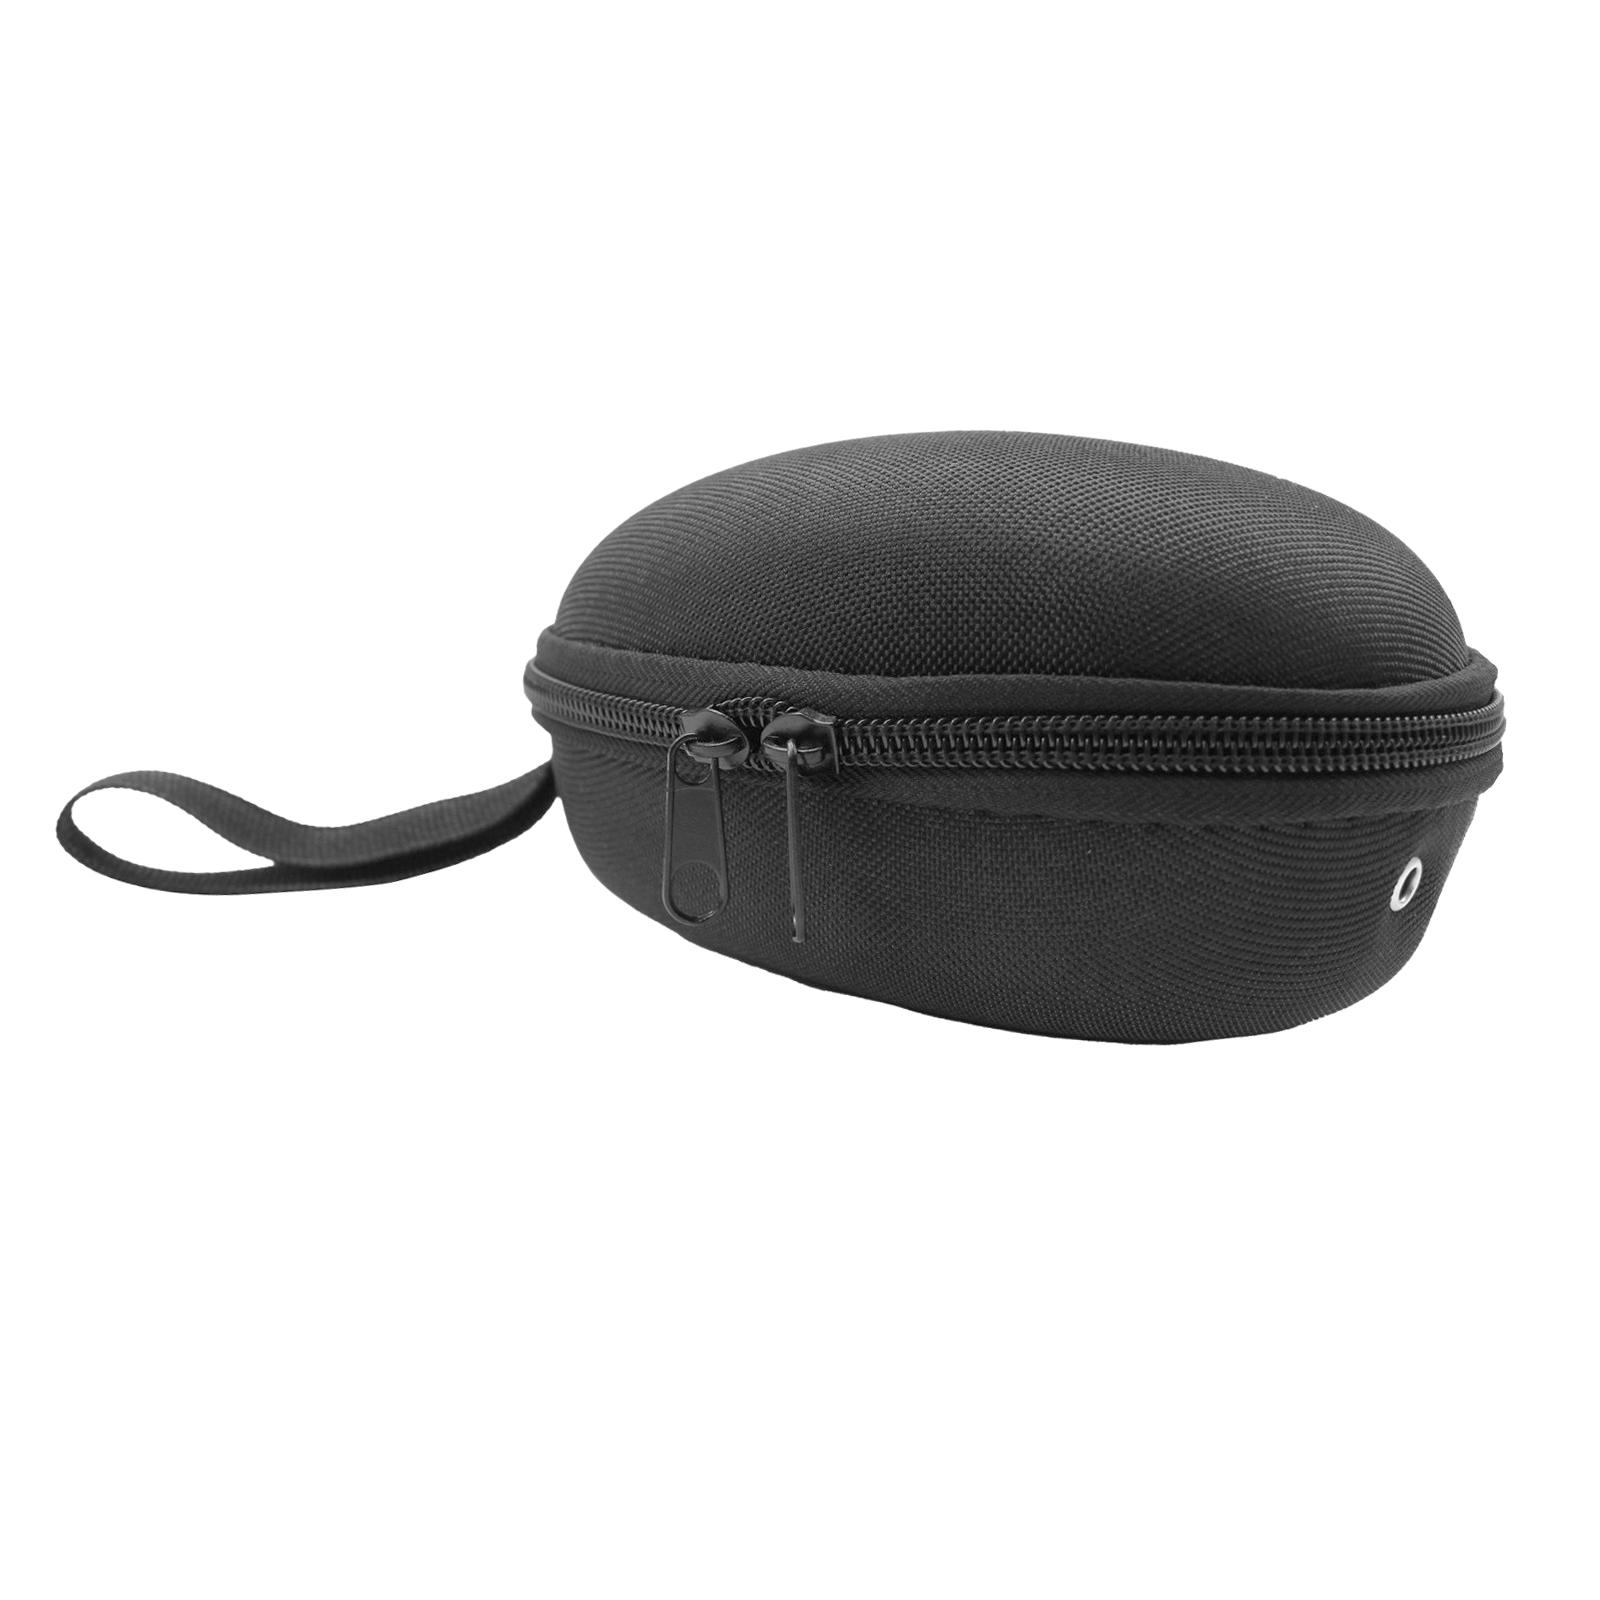 Fishing Reel Bag Protector with Handle Strap Fishing Pouch Bag for